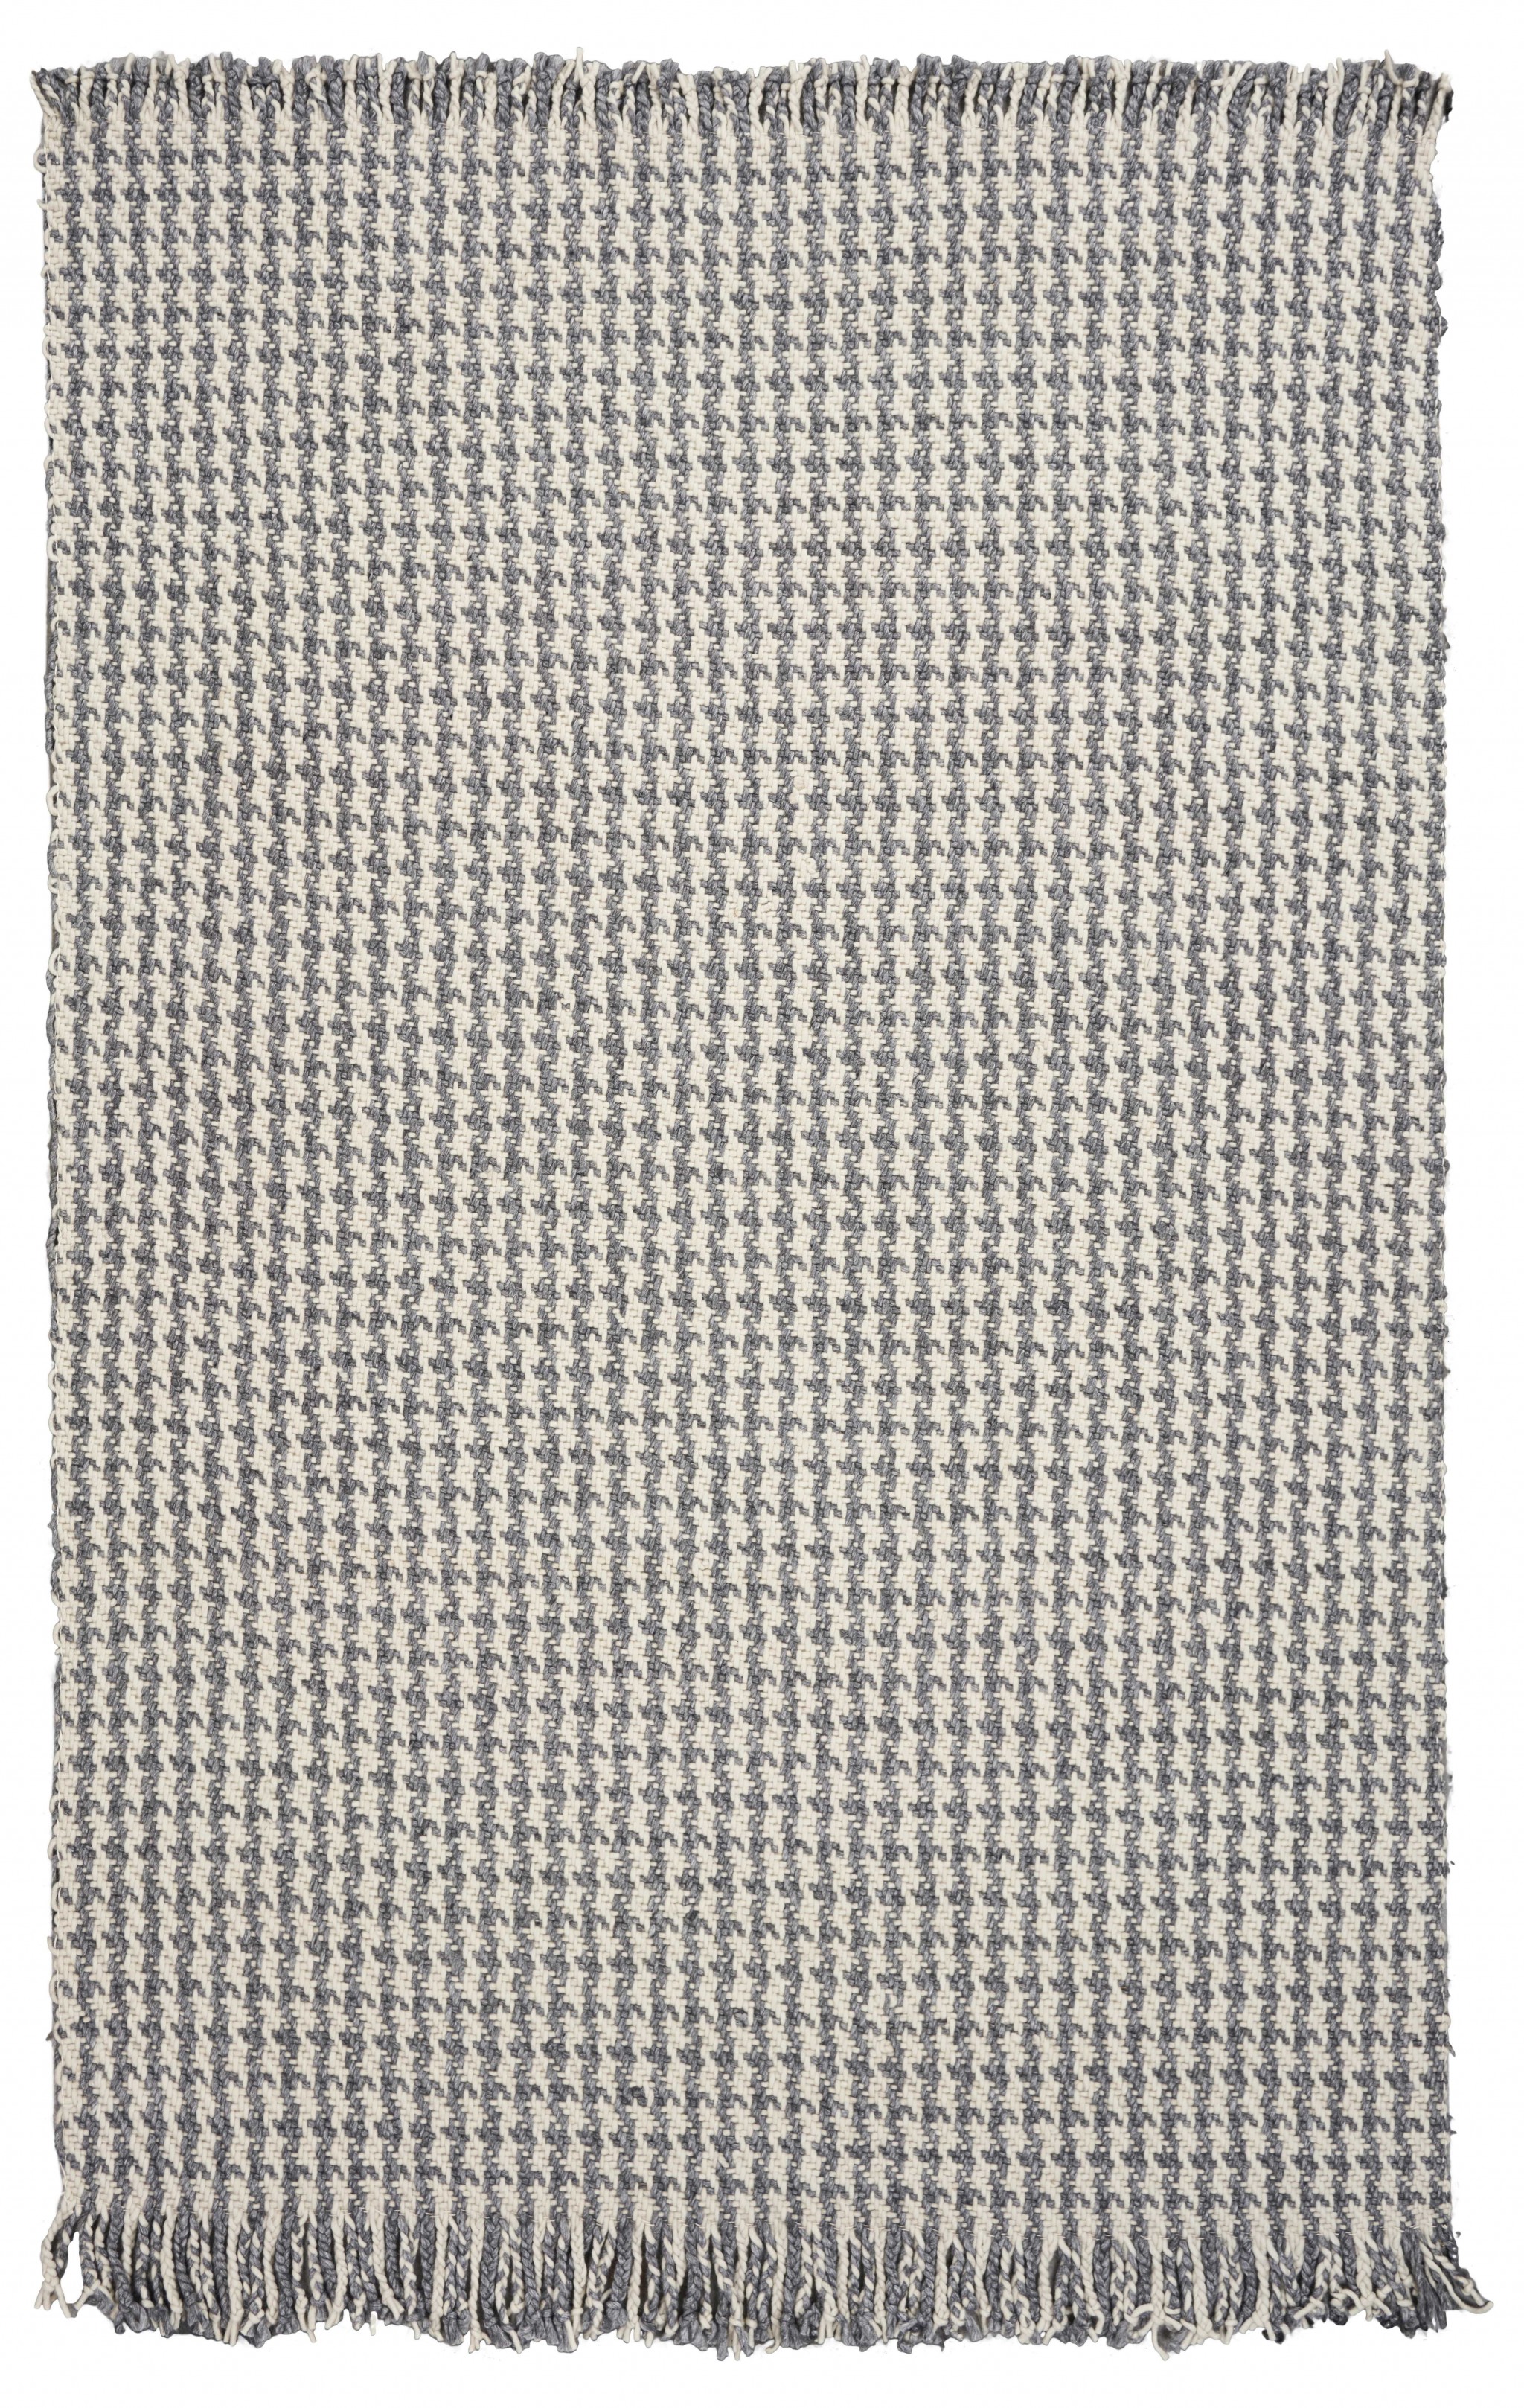 5' X 8' Ivory Or Grey Plaid Knitted Wool Indoor Area Rug With Fringe-353055-1